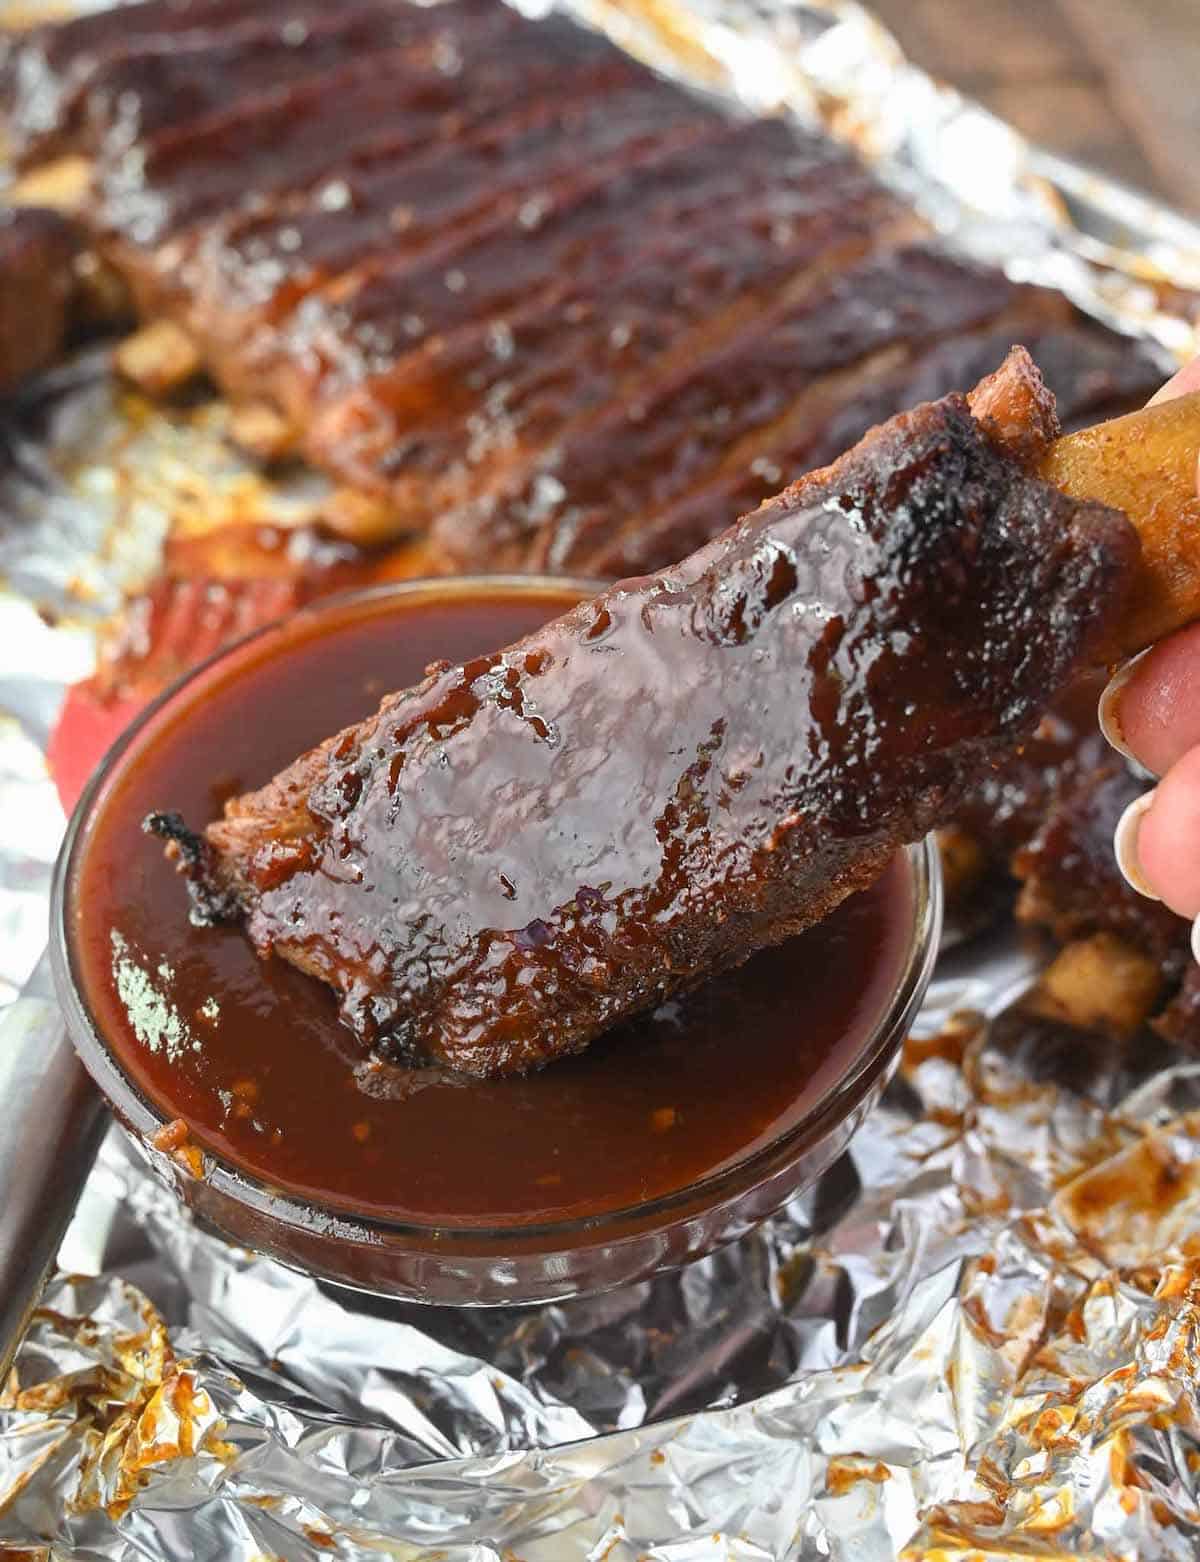 A pork rib being dipped in a side of bbq sauce.